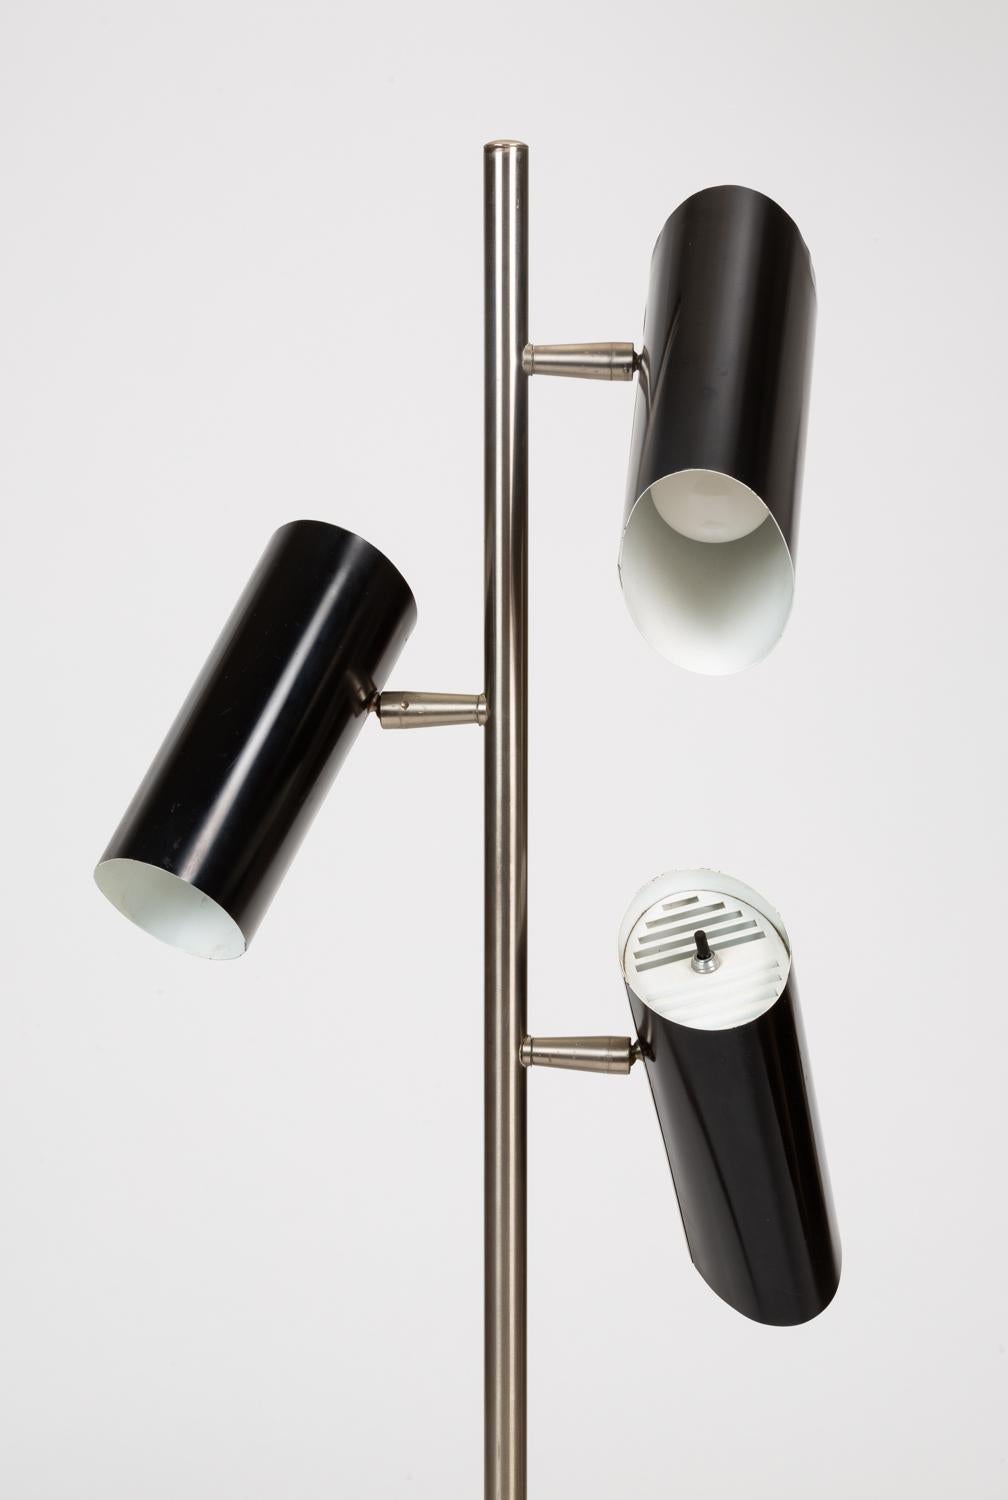 A three shade floor lamp by Gerald Thurston for Lightolier. Distinguished by the unique, oblong canister shades, this lamp provides three-directional illumination from adjustable spots. The central column is polished steel, with enameled aluminum